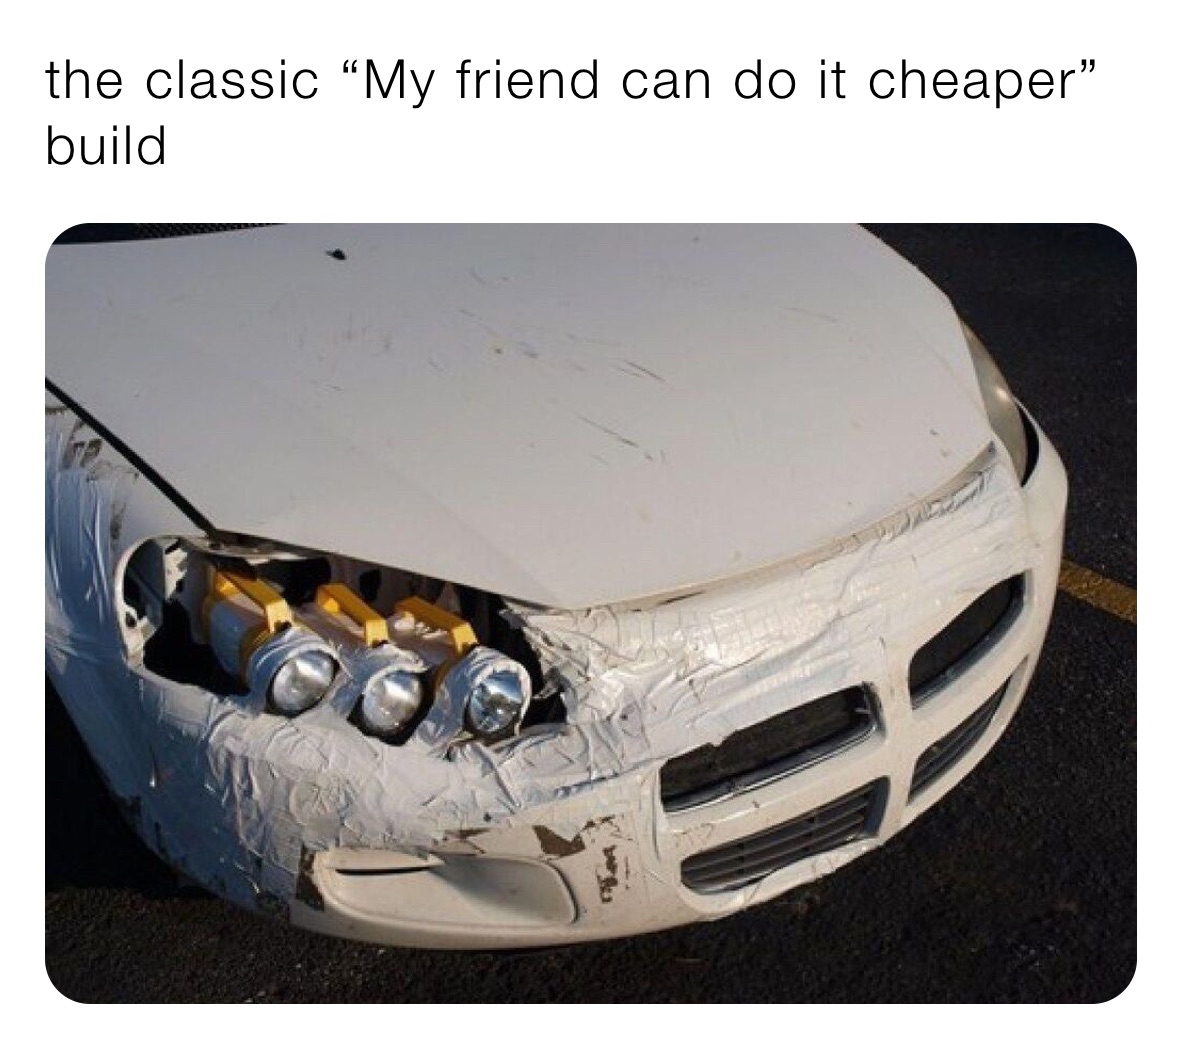 people who knew someone one who could do it cheaper - redneck headlight repair - the classic "My friend can do it cheaper" build